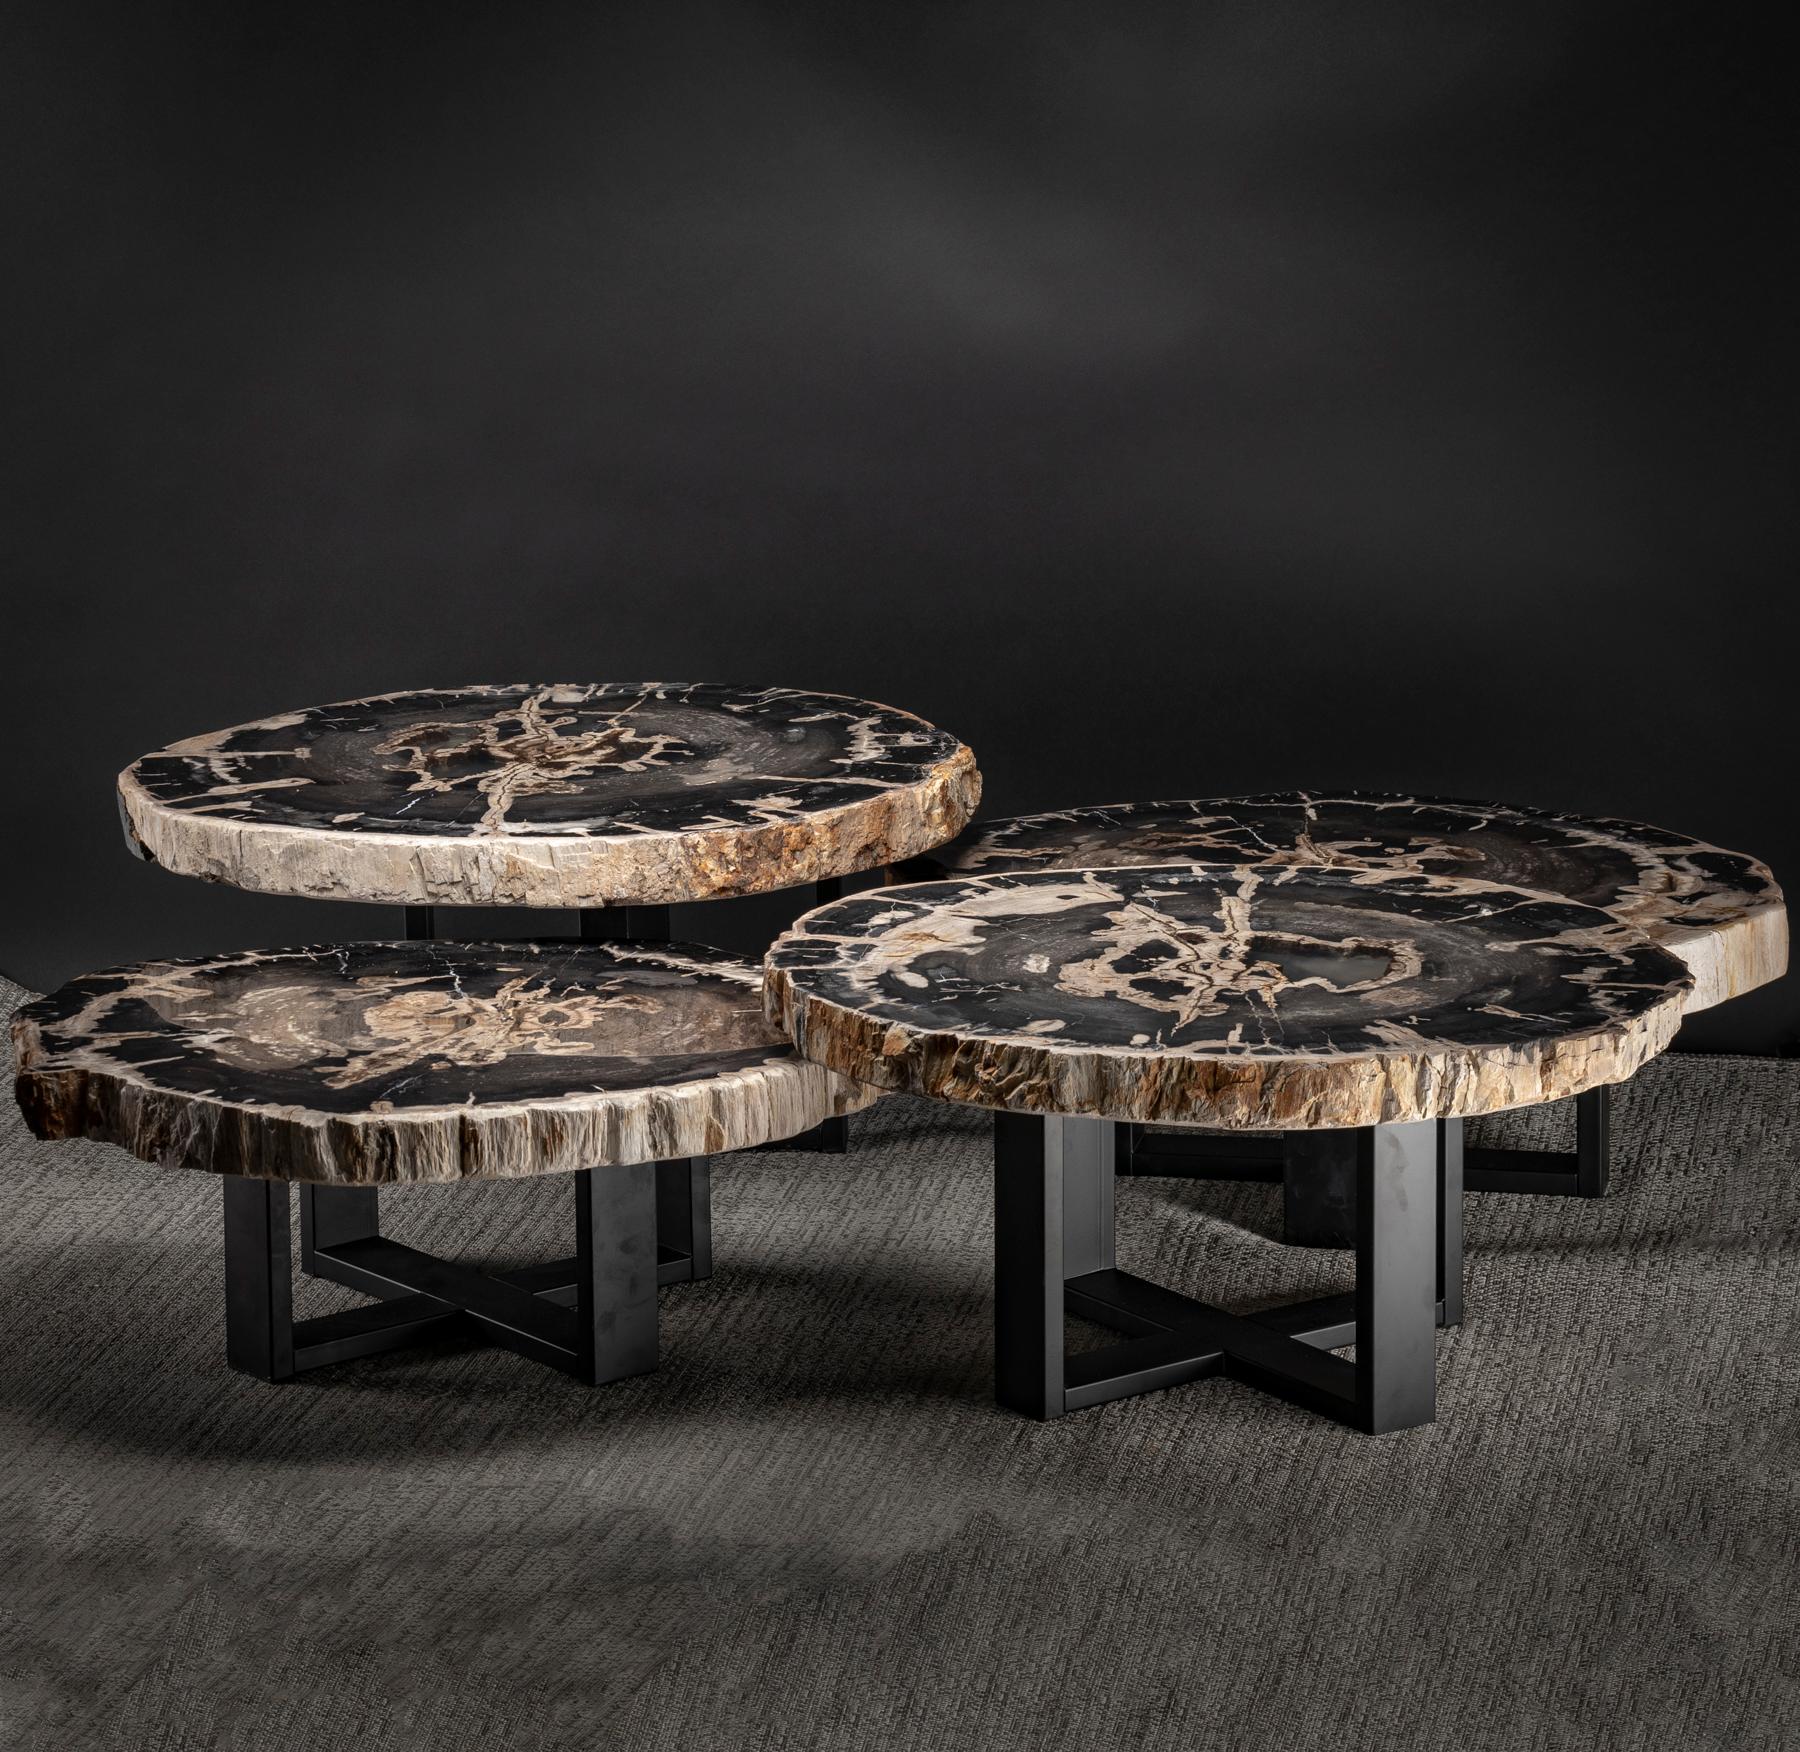 One of a kind Center table, featuring 4 individual petrified wood tables at different height with metal base
Source: Java, Indonesia
Wood fossilization is a group of processes where all organic material is replaced by minerals. Petrifaction